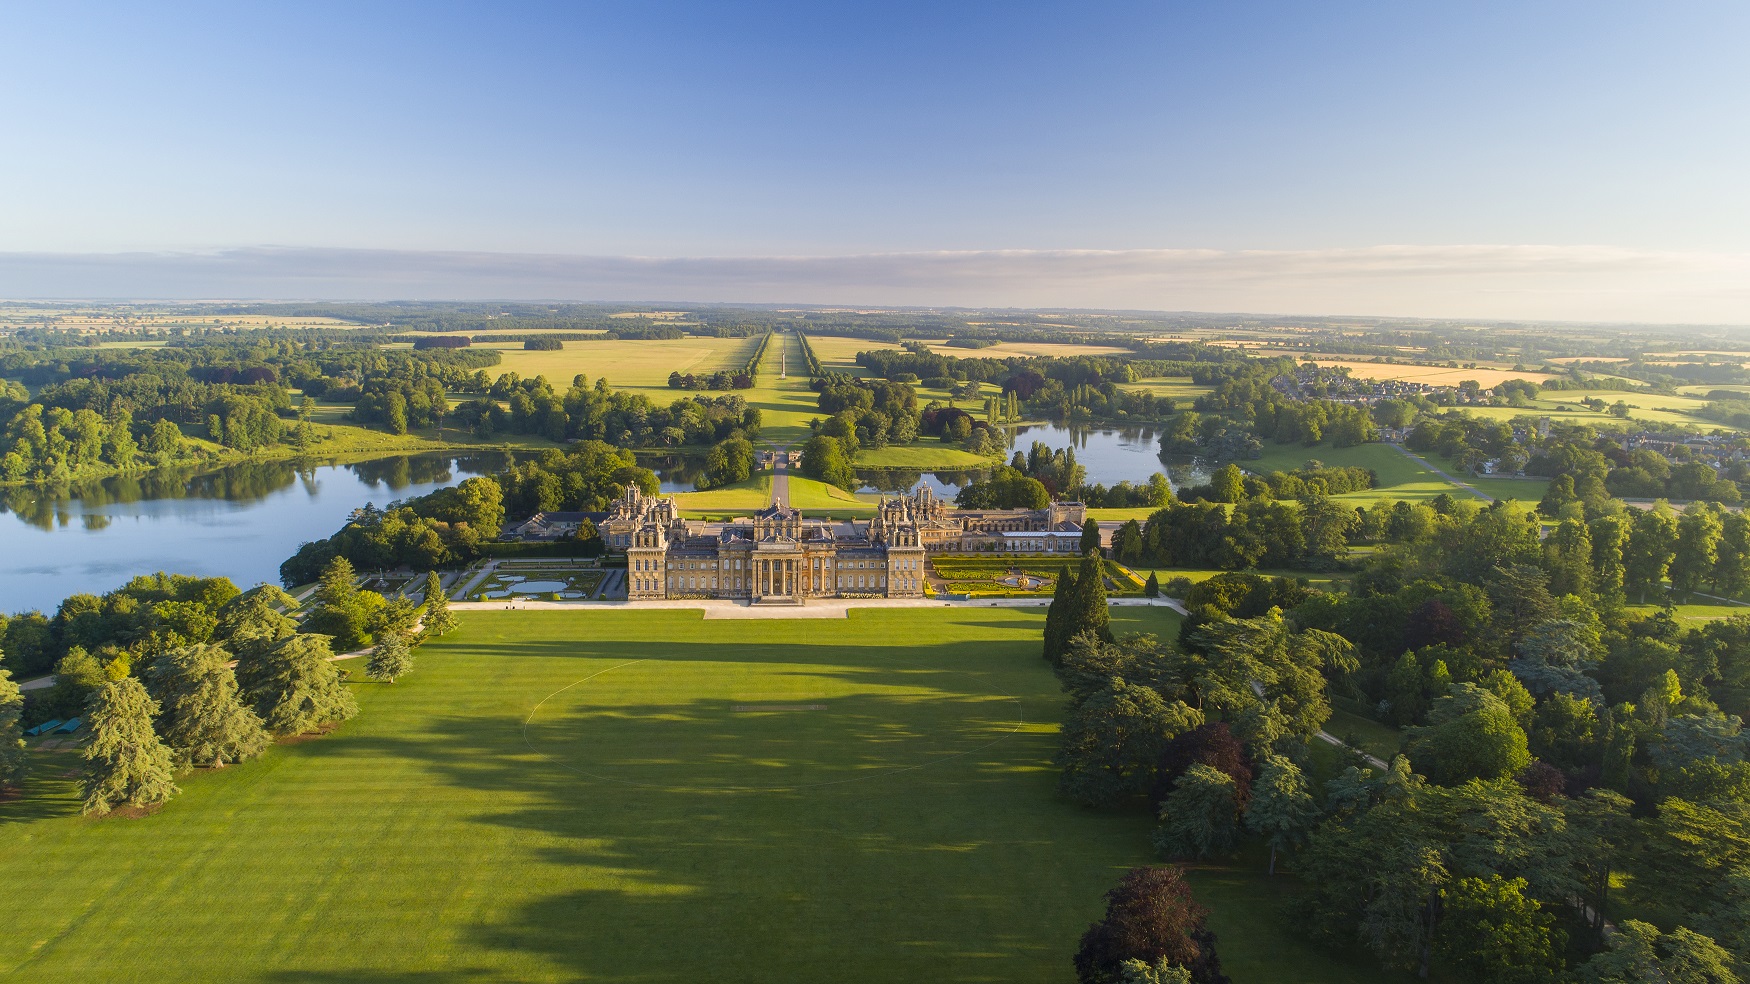 Drone view of Blenheim Palace and Estate